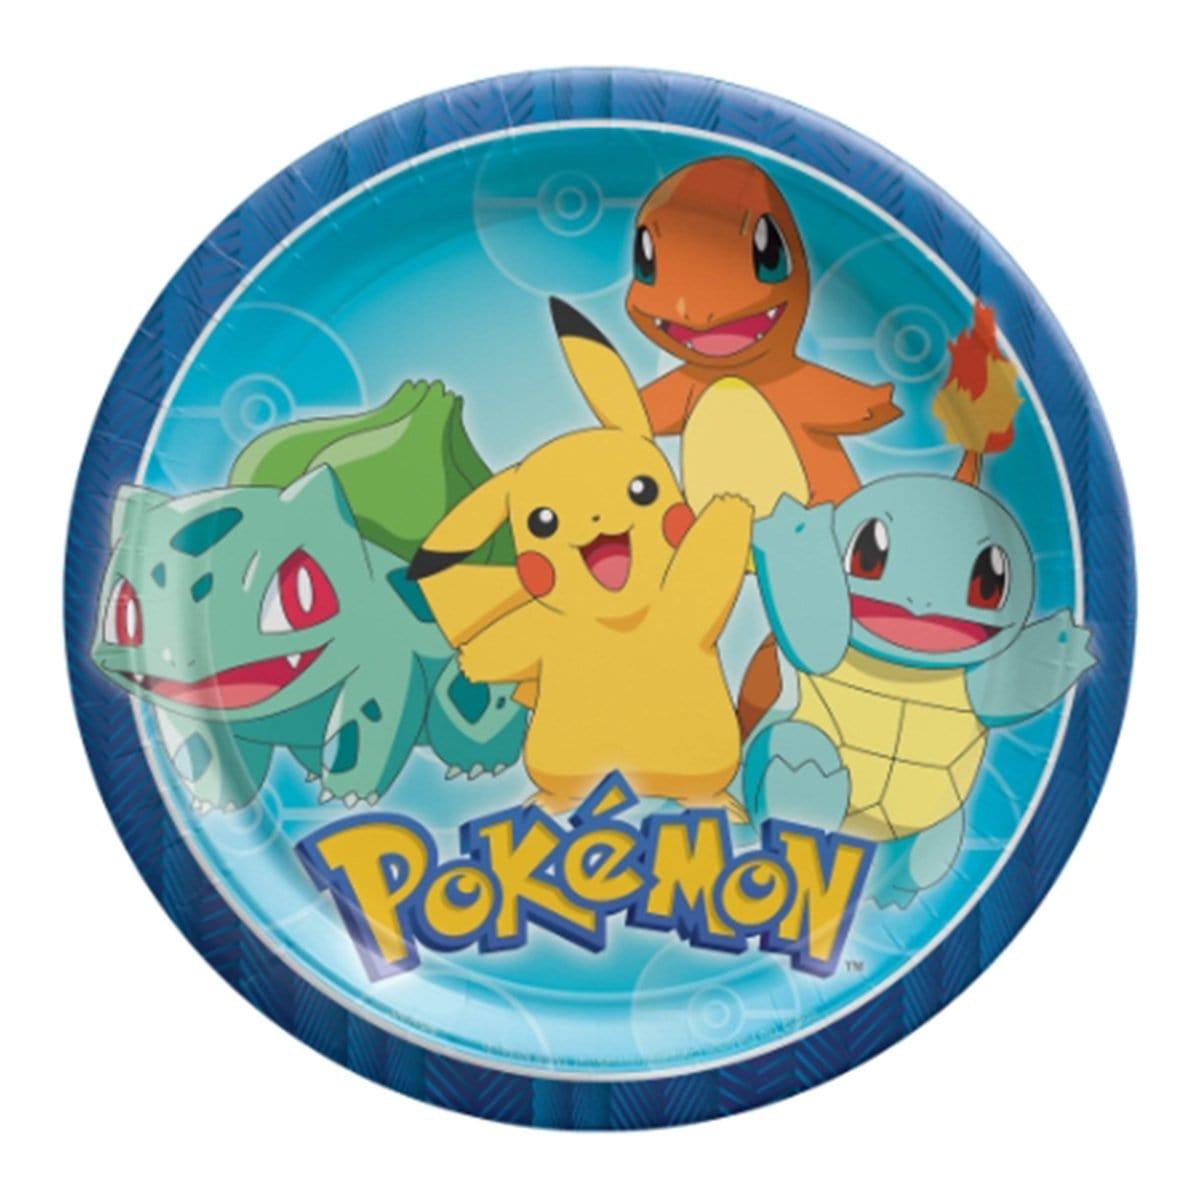 Buy Kids Birthday Pokémon Dinner Plates 9 inches, 8 per package sold at Party Expert